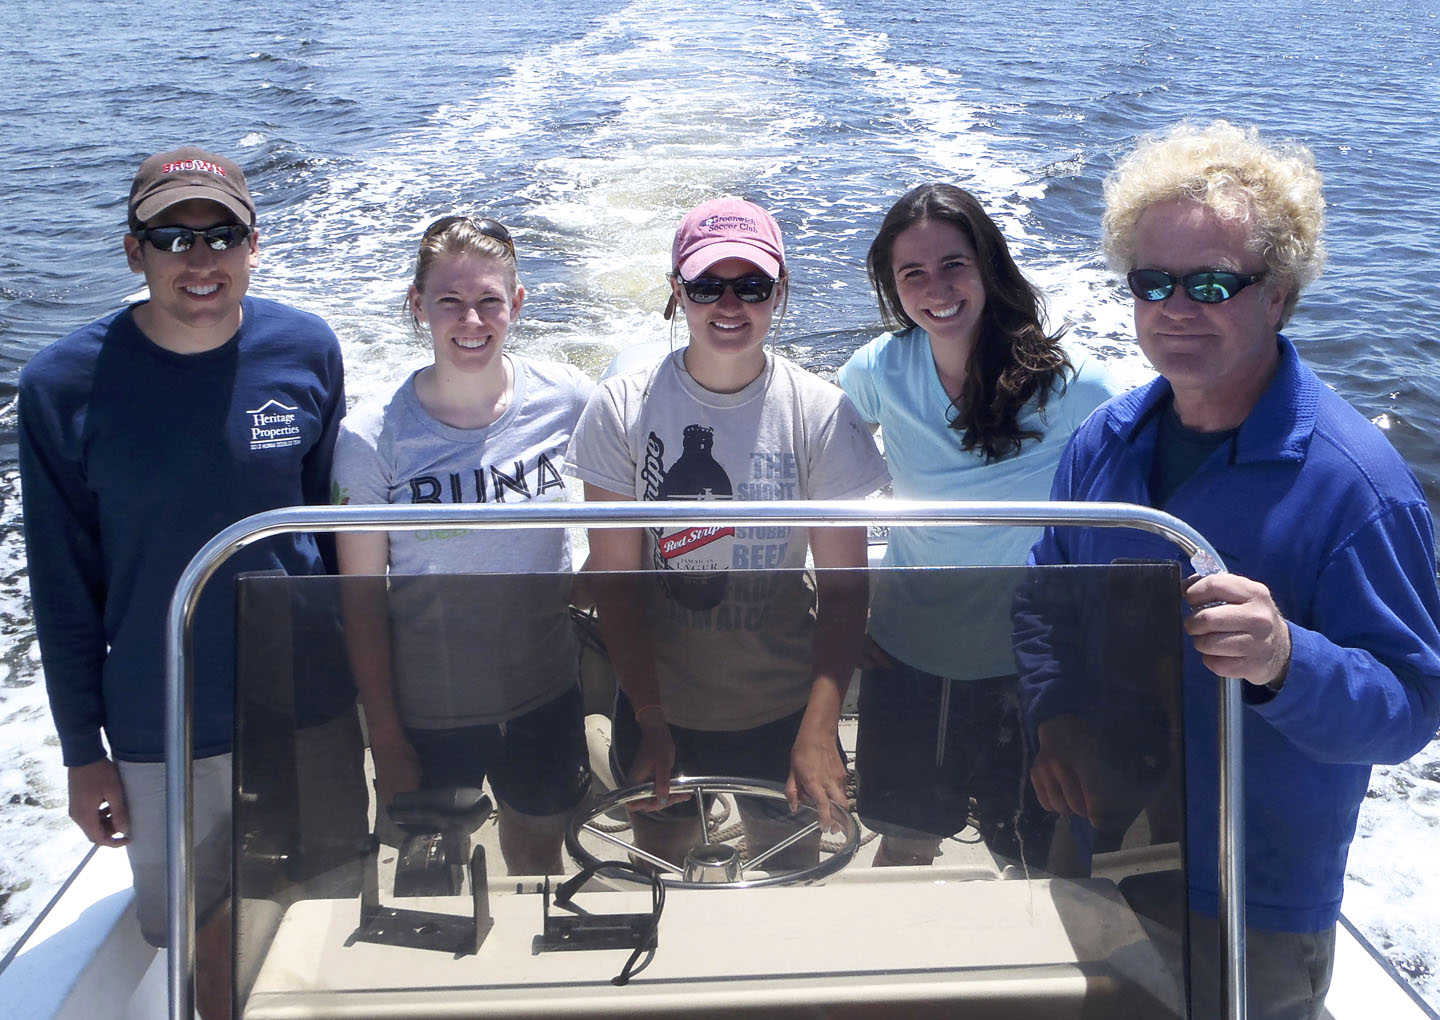 Moving on to Narragansett Bay: The research team, from left: Matt Bevil, Elena Suglia, Caitlin Brisson, Sinead Crotty, and Mark Bertness. Salt marsh die-off, properly understood, must now be managed.